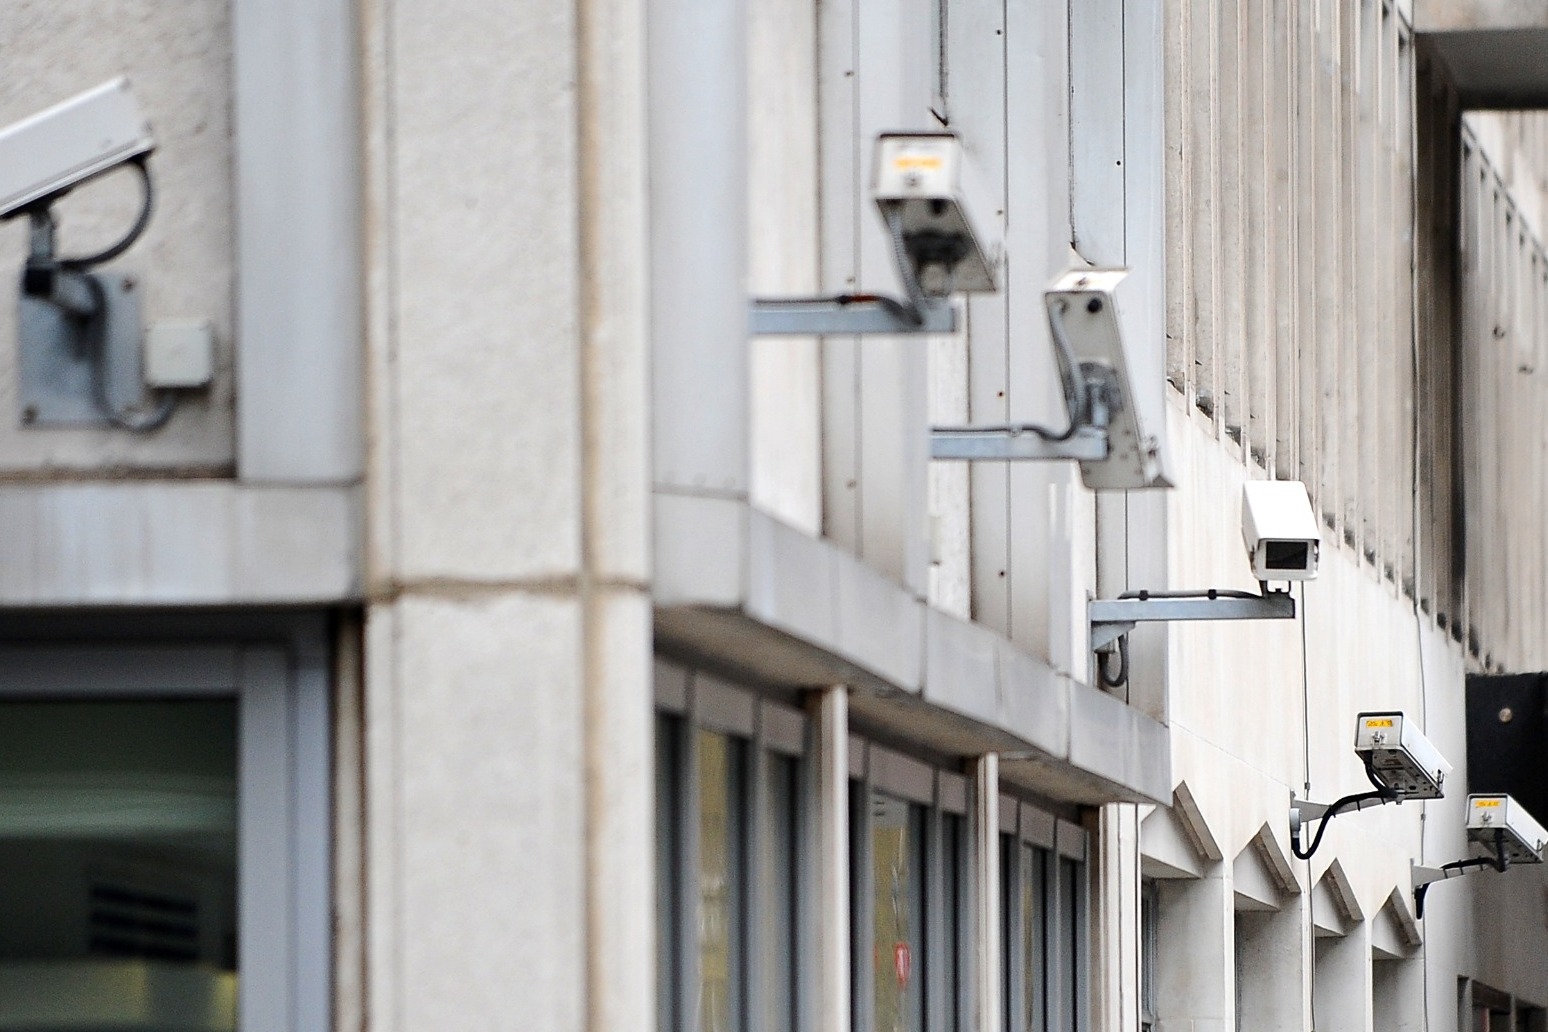 Watchdog warning over police use of Chinese-made surveillance equipment 